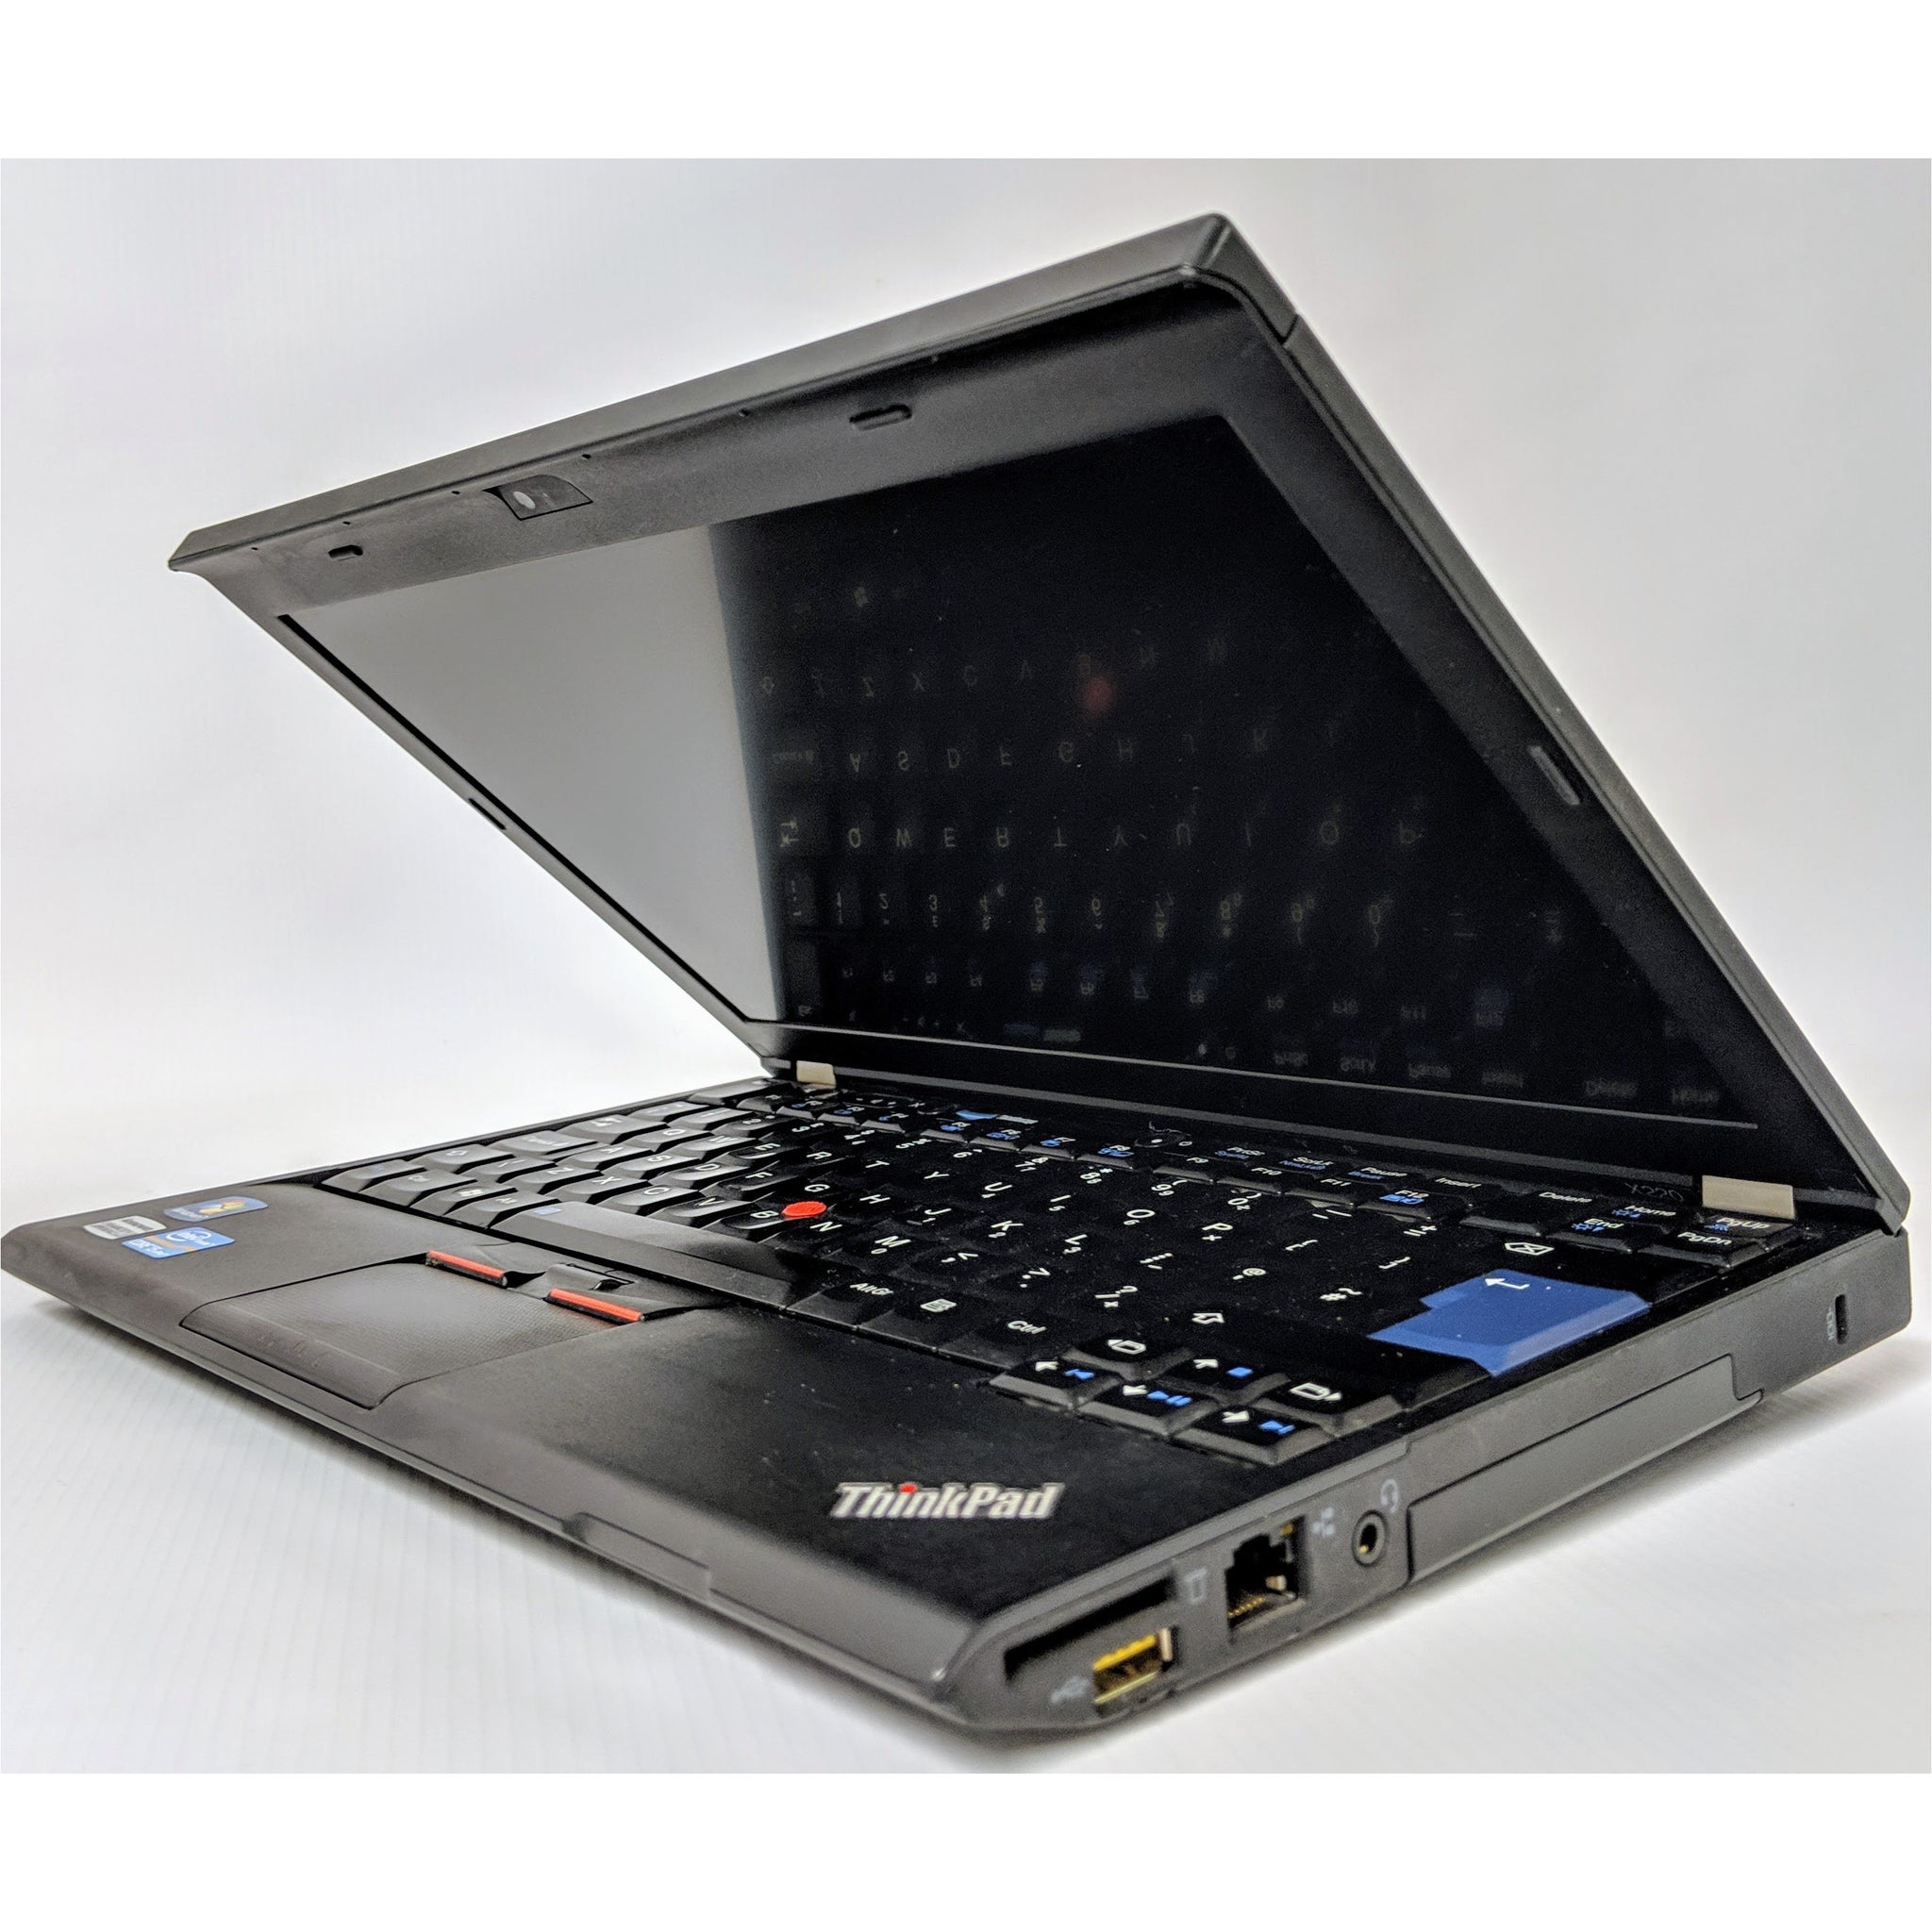 X220 front Keyboard